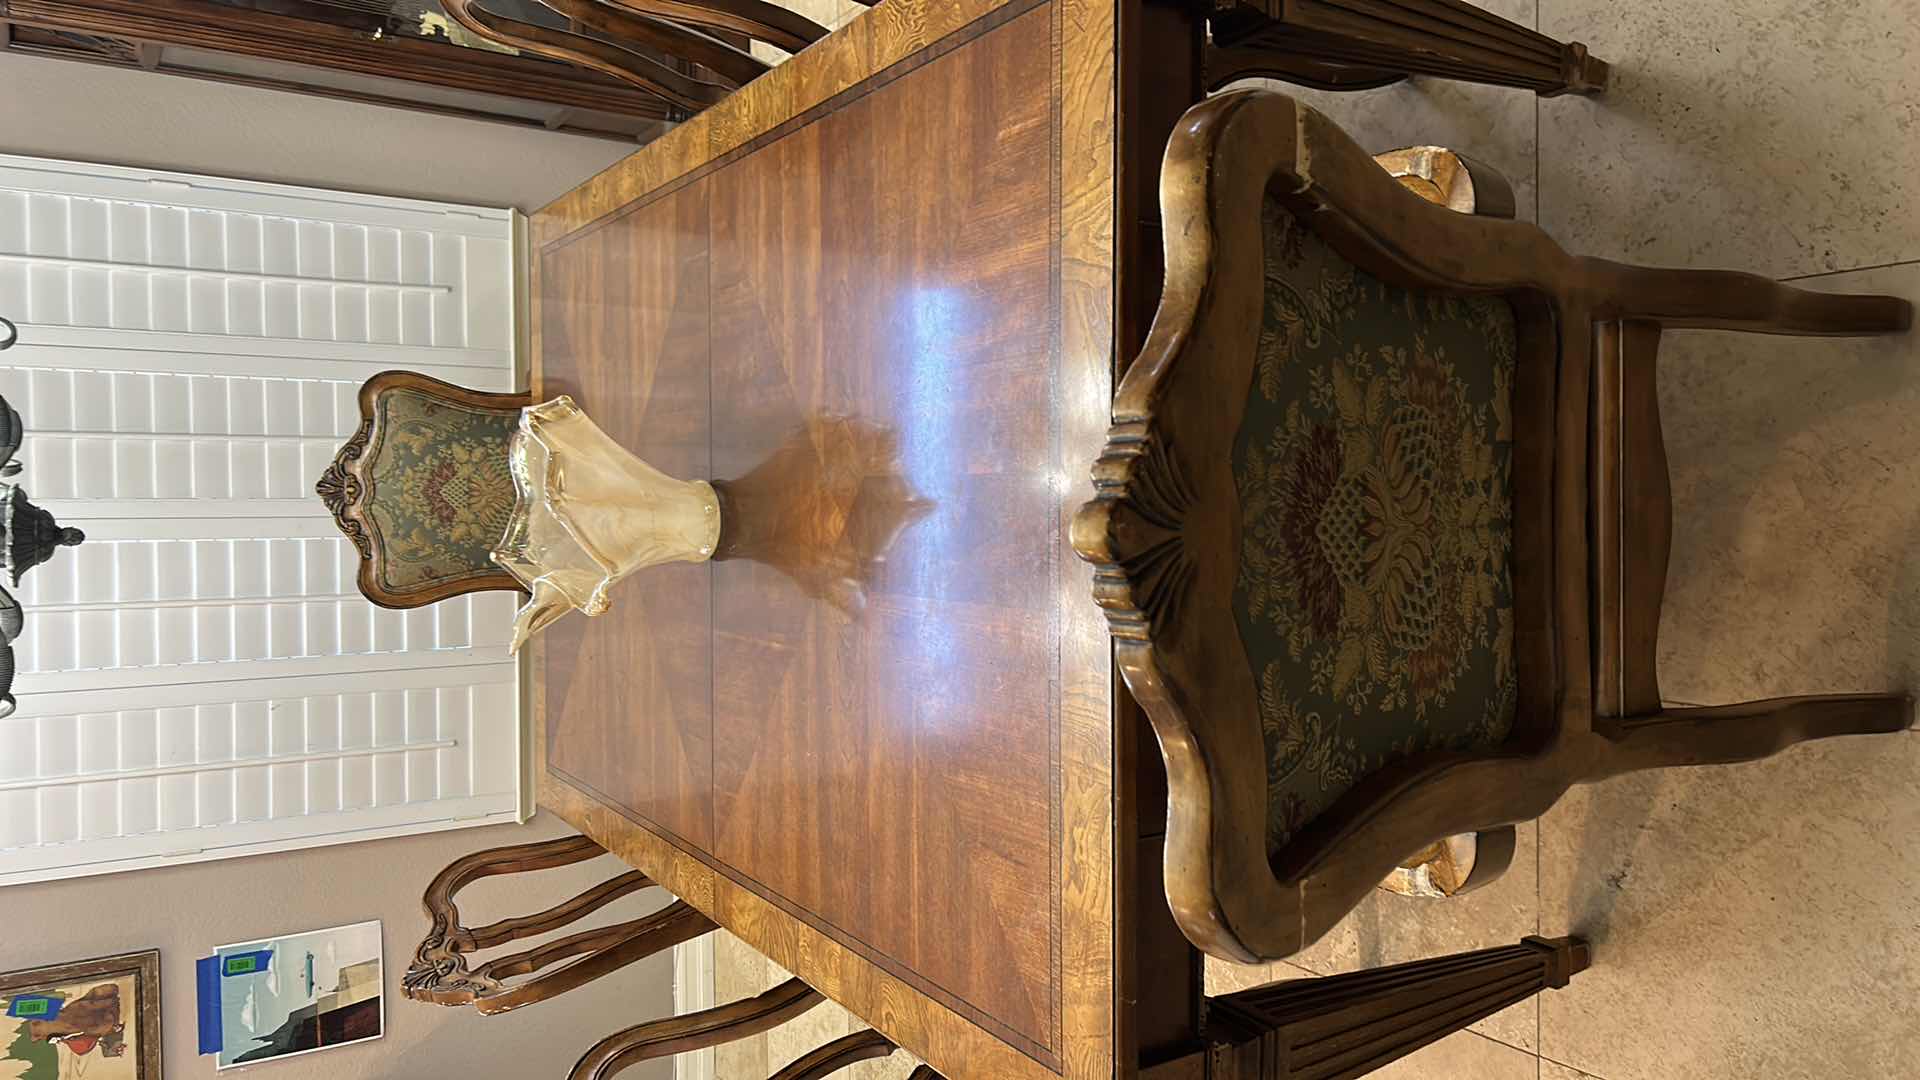 Photo 2 of ETHAN ALLEN RECTANGLE DINING TABLE 46” x 72” x 30” SERIAL NO 67514 $1499 CHAIRS $2741 - HAS TWO LEAFS